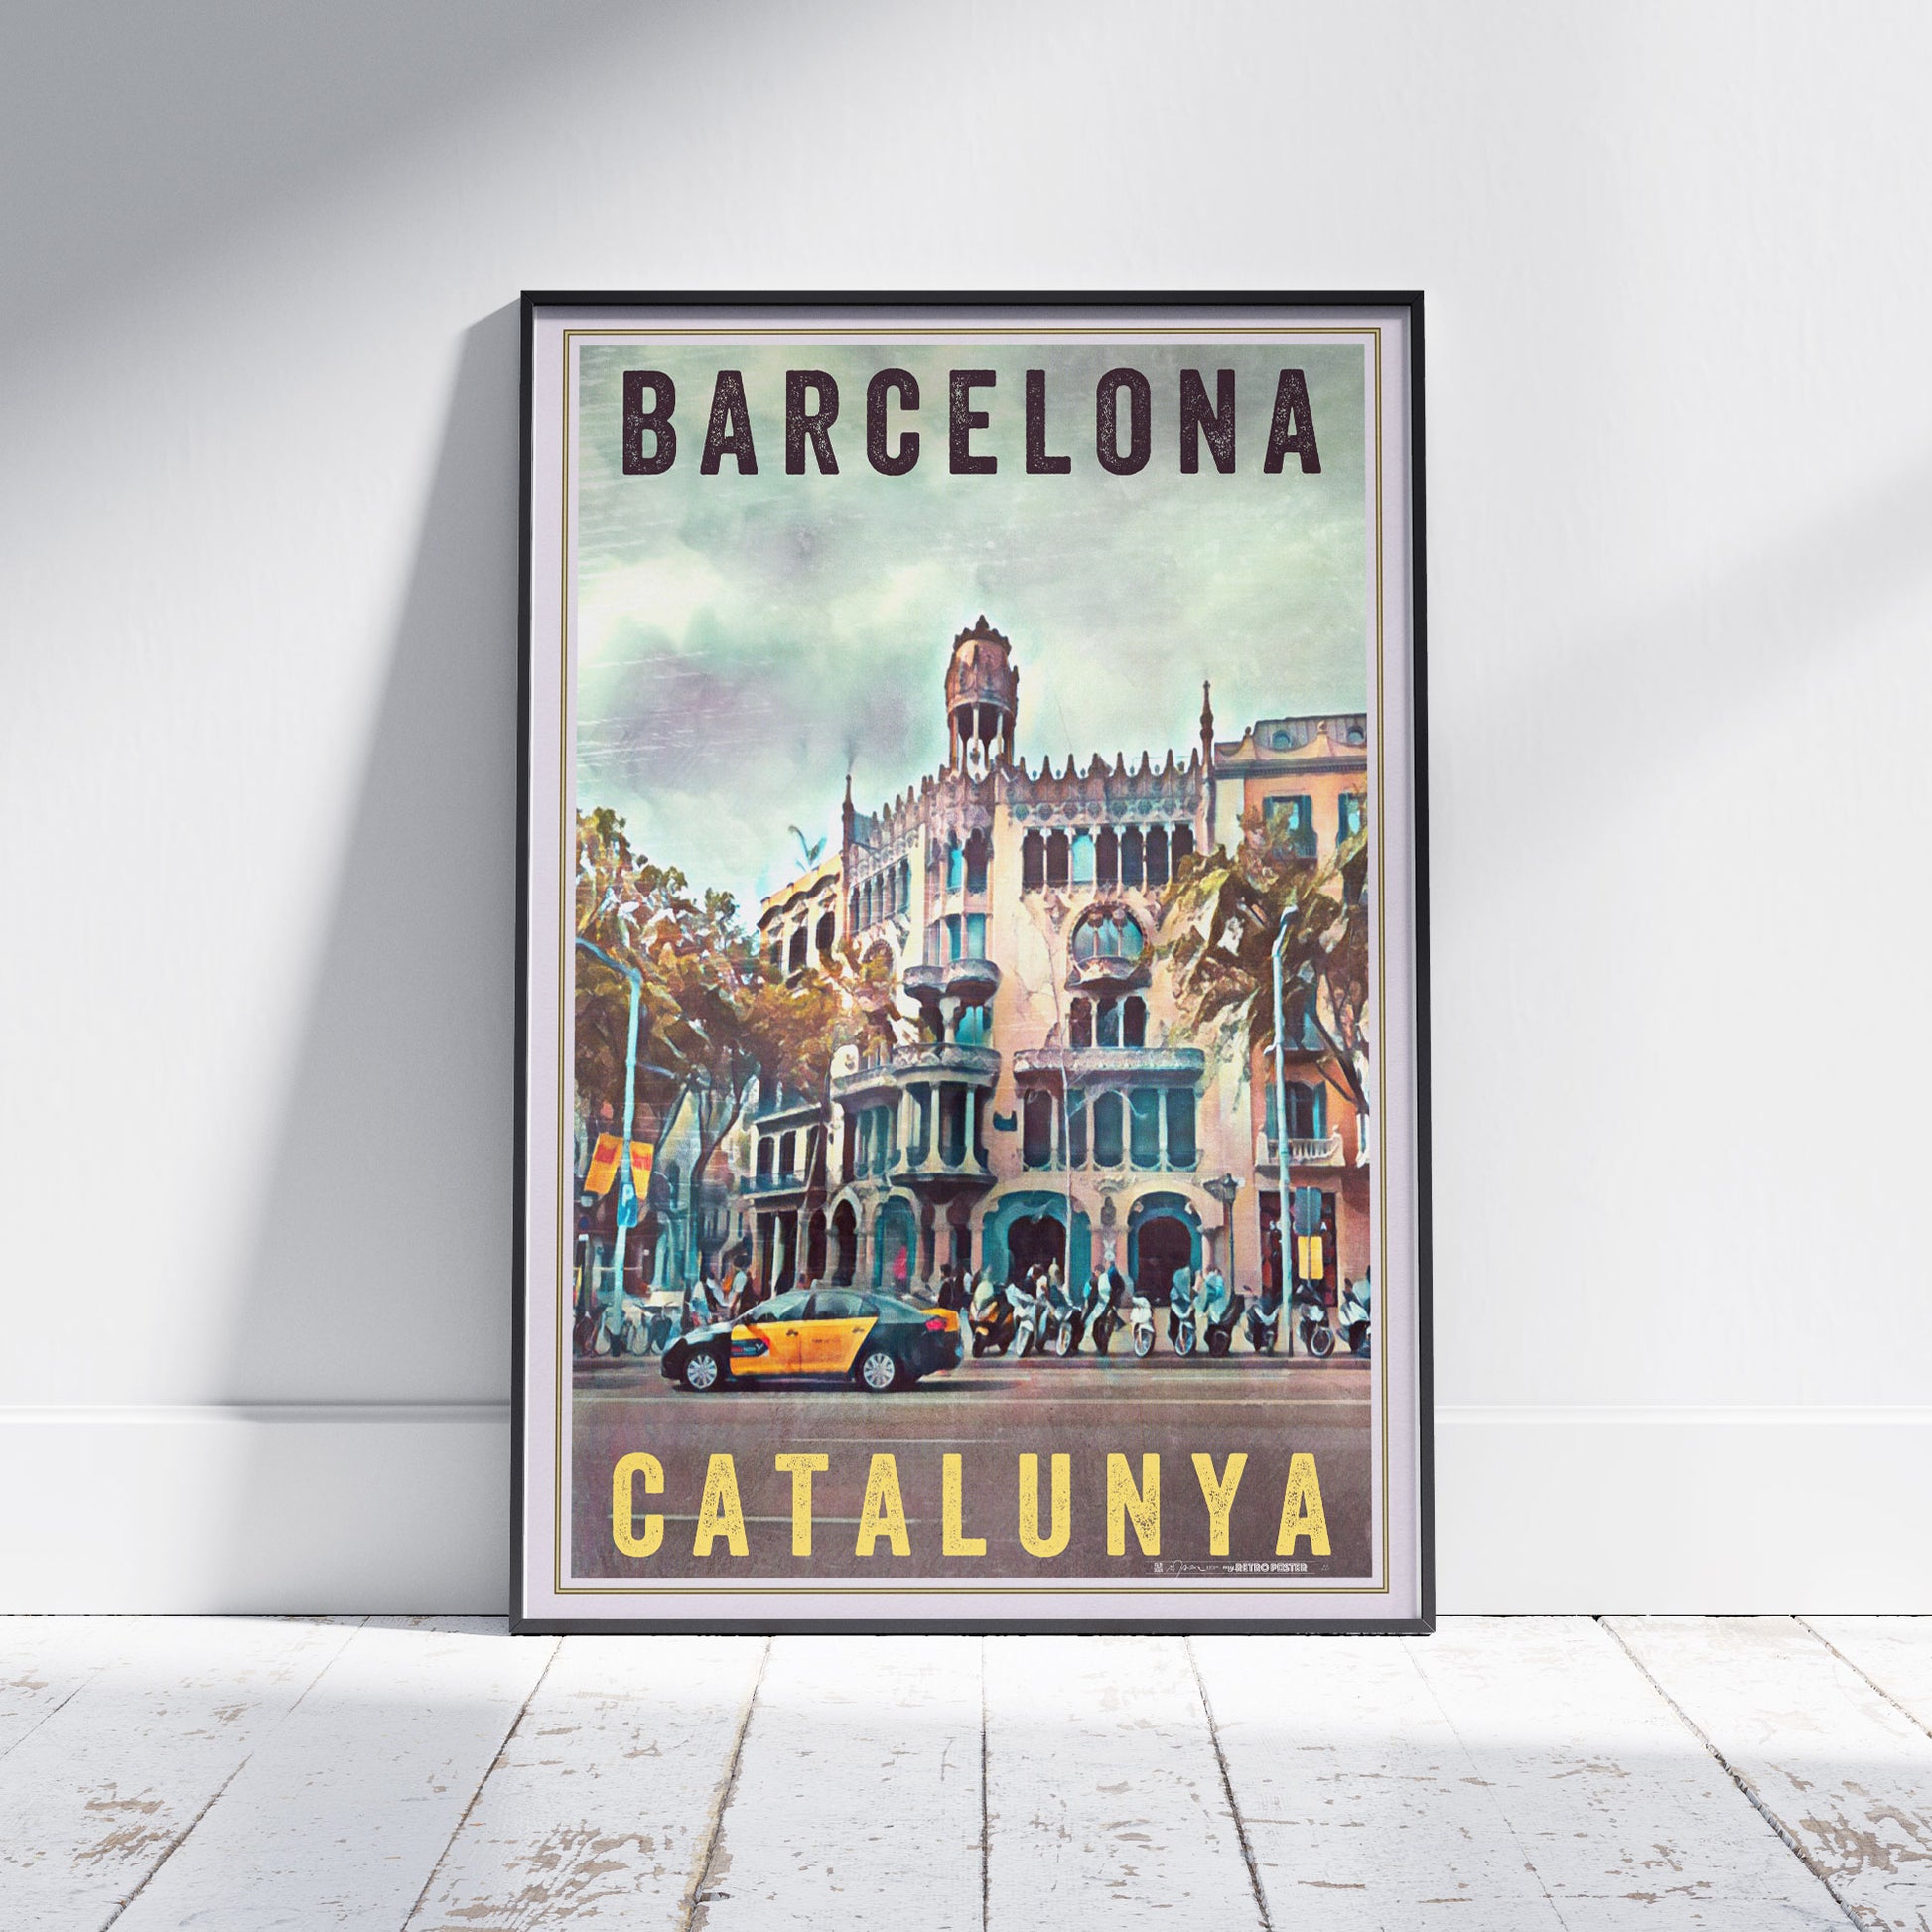 Limited Edition Casa Lleó Morera Barcelona Poster by Alecse, Black & Yellow titles version, Framed on White Wooden Floor